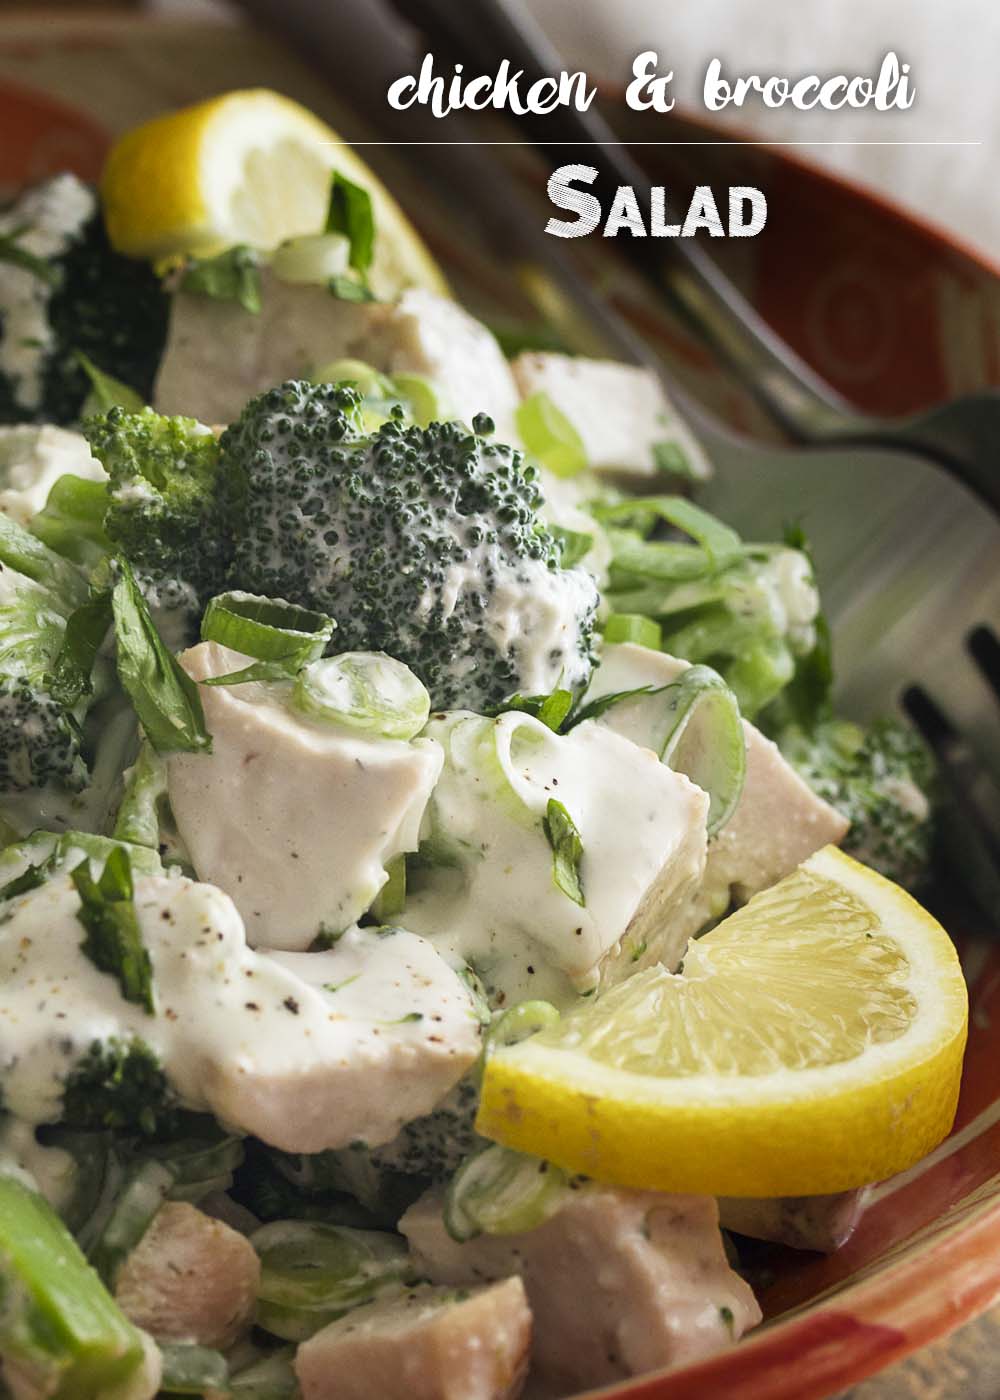 Juicy diced chicken and tender broccoli are tossed with a creamy, cottage cheese dressing in this simple but substantial summer salad. Healthy, low carb, and easy! | justalittlebitofbacon.com